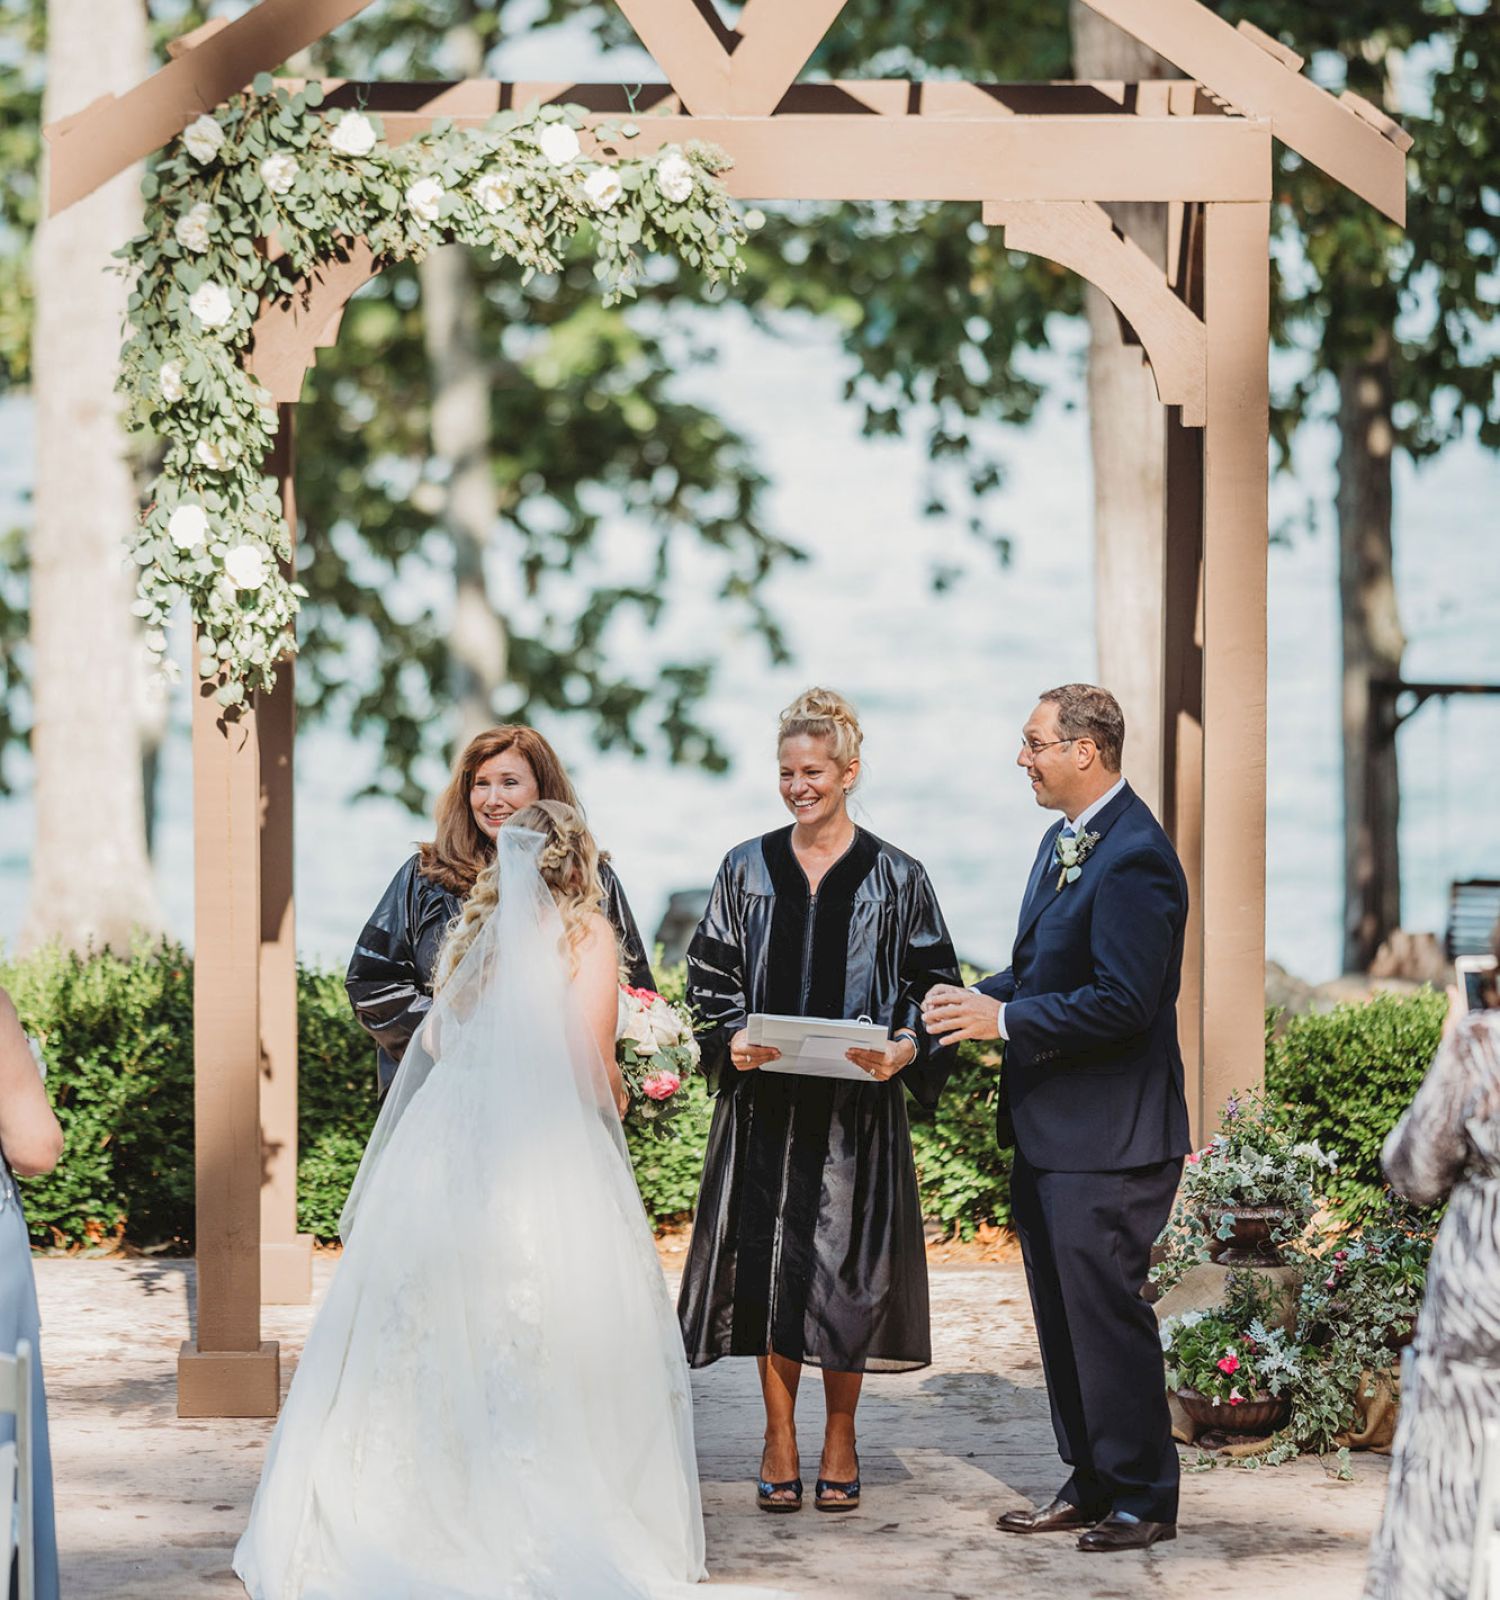 A couple stands under an arch, with an officiant, during an outdoor wedding ceremony. Trees and greenery are visible in the background, ending the sentence.